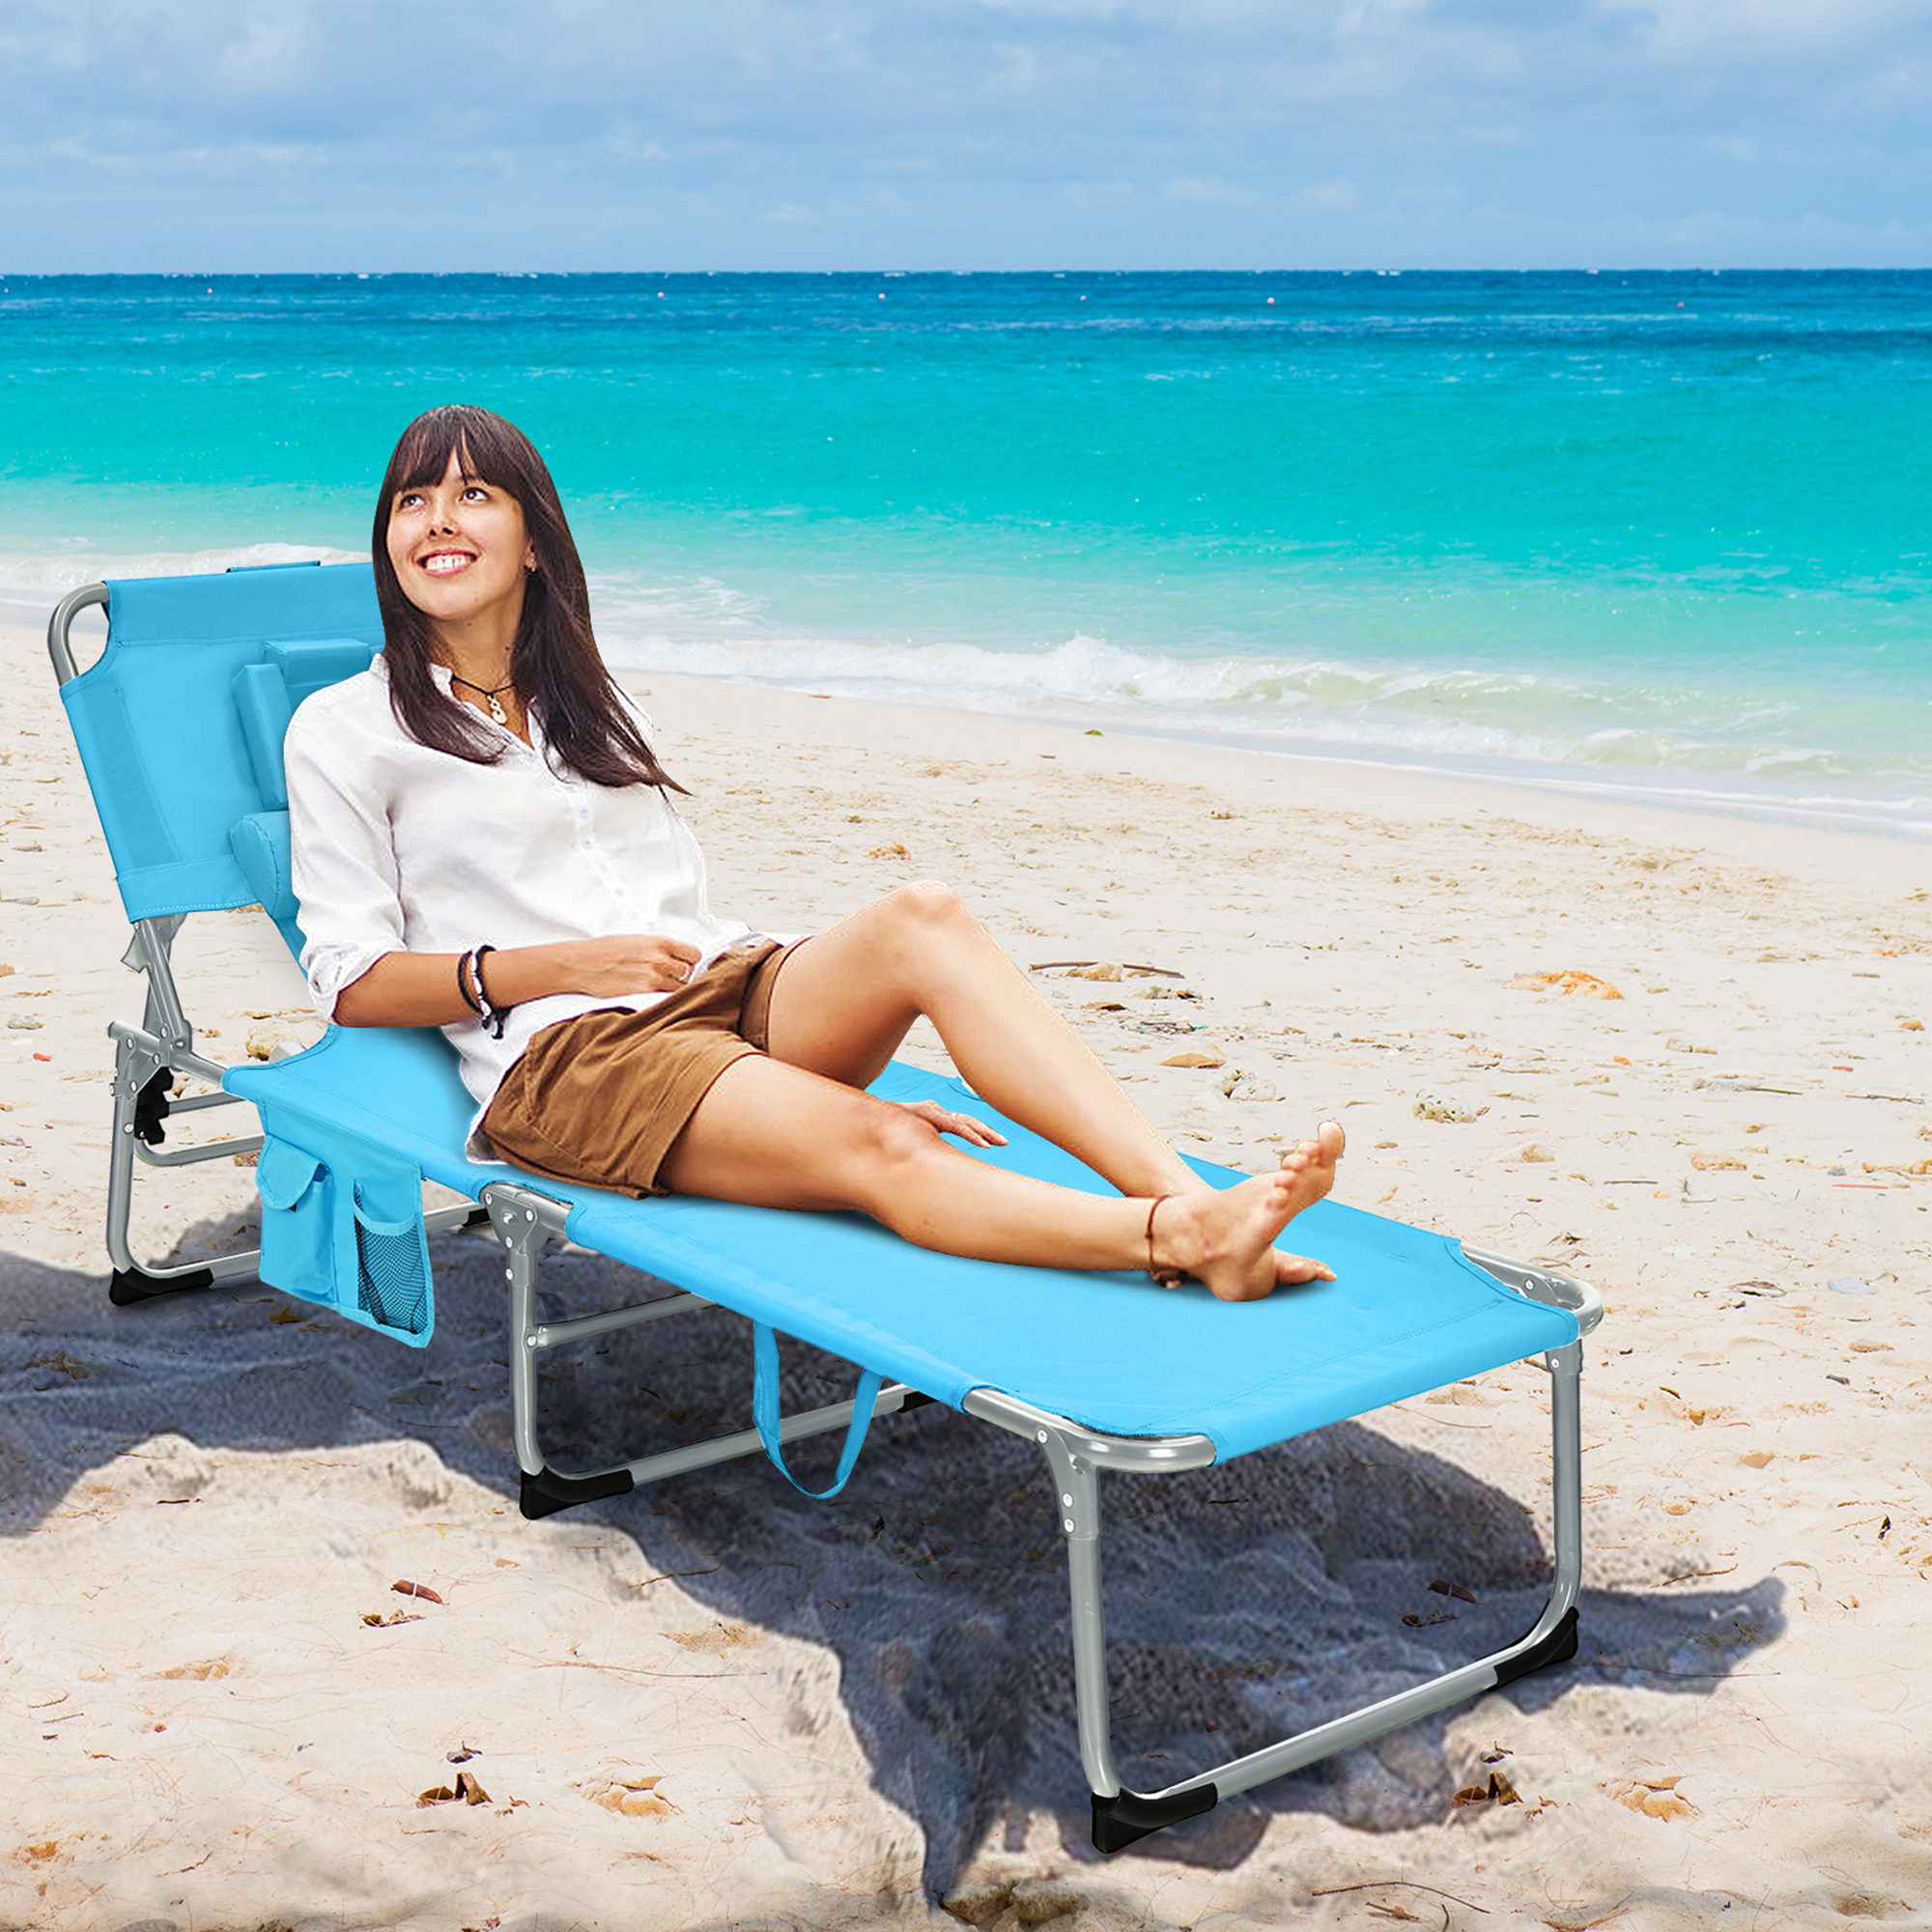 Gymax Portable Beach Chaise Lounge Chair Folding Reclining Chair w/ Facing Hole Turquoise - image 4 of 10